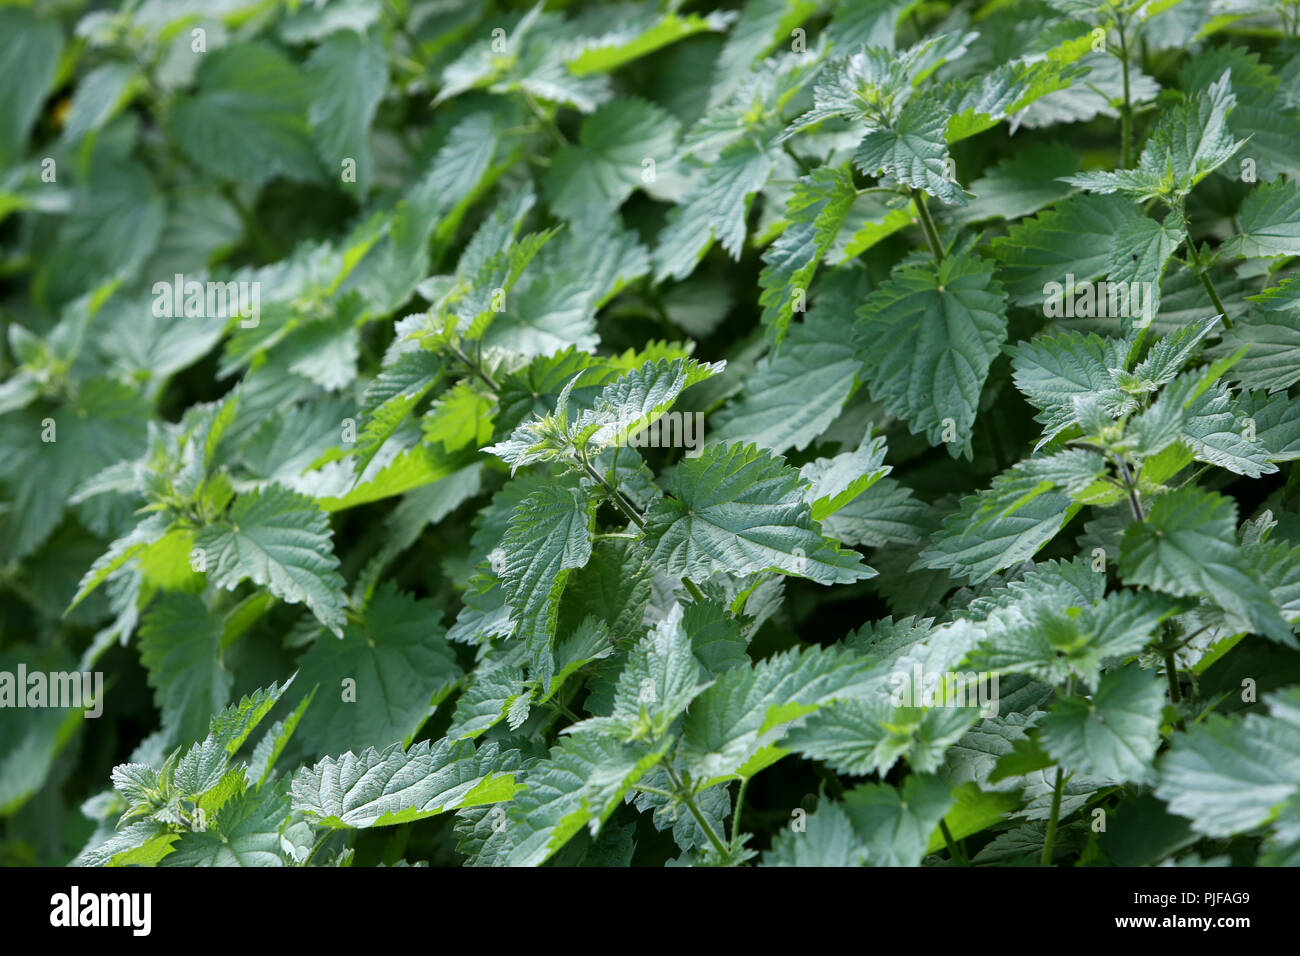 A large area of Common Nettles also known as Stinging Nettles in a car park in Bognor Regis, West Sussex, UK. Stock Photo